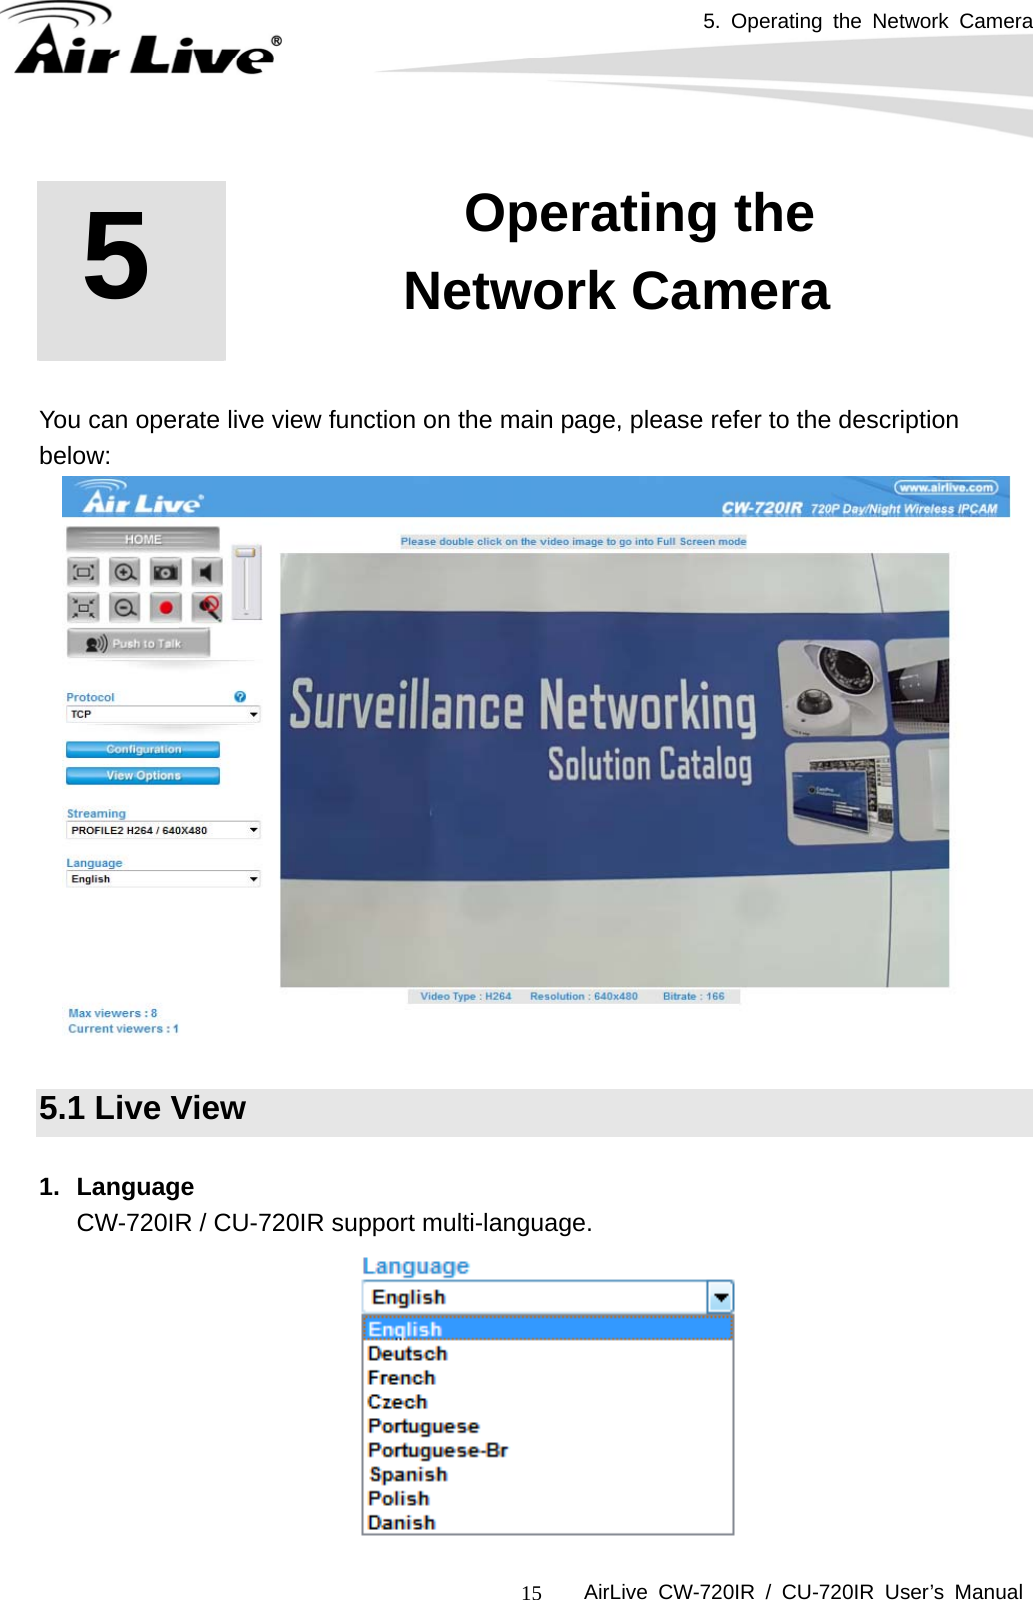 5. Operating the Network Camera      AirLive CW-720IR / CU-720IR User’s Manual 15       You can operate live view function on the main page, please refer to the description below:    5.1 Live View  1. Language CW-720IR / CU-720IR support multi-language.  5   5. Operating the Network Camera 